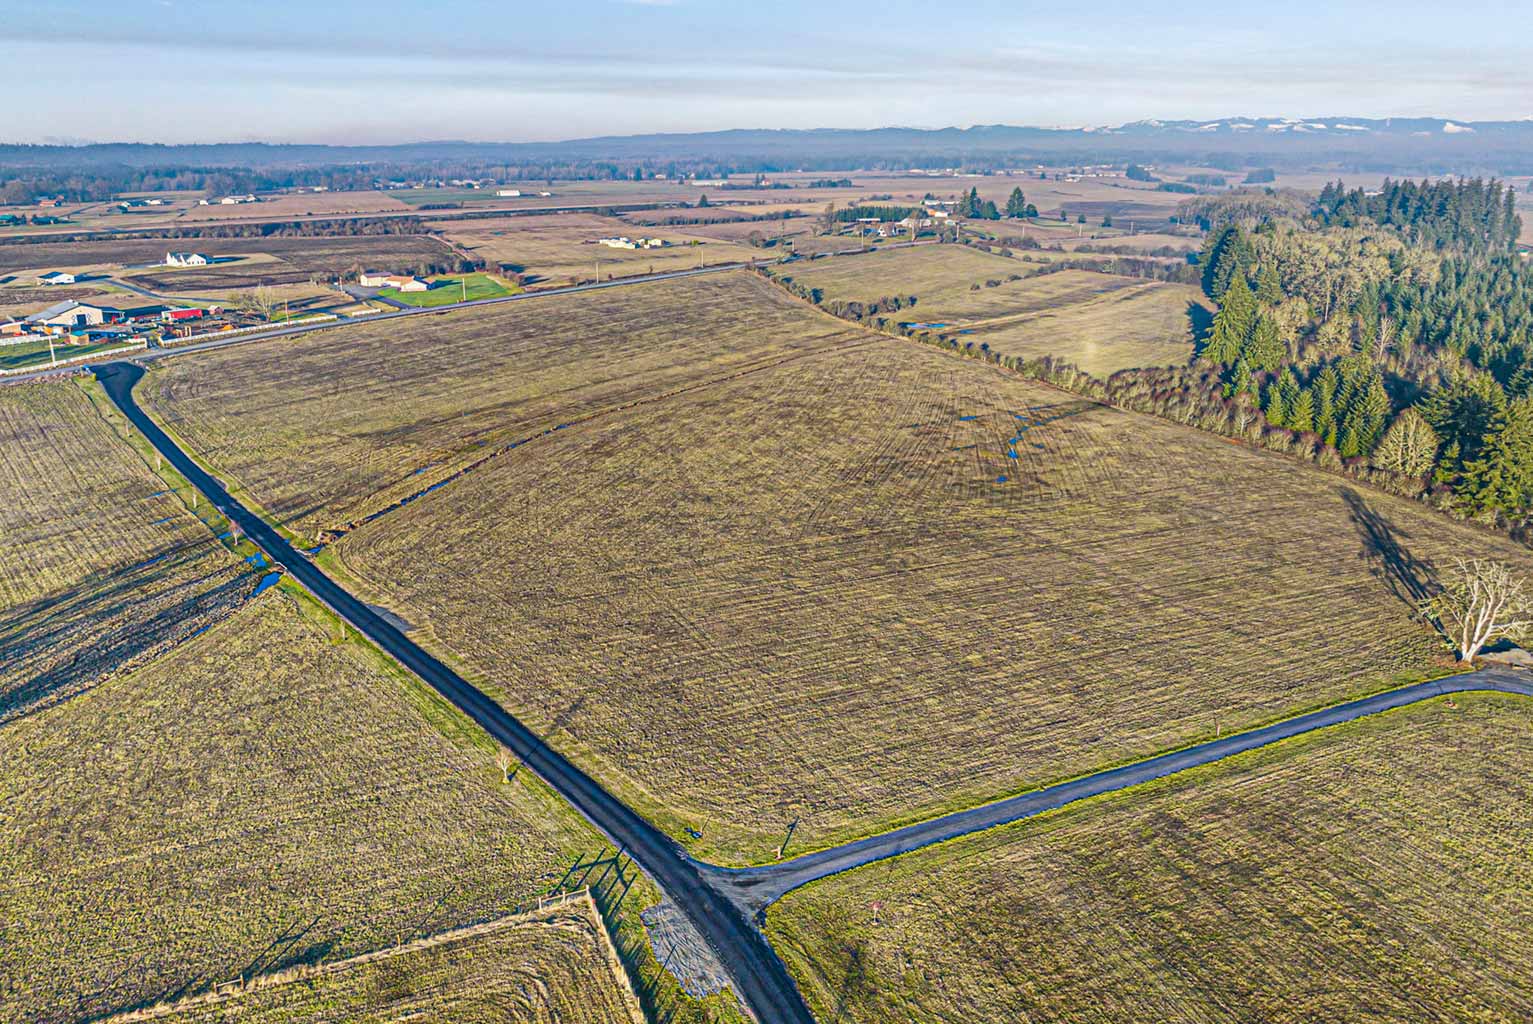 Two additional 20 acre parcels of land are available for separate sale